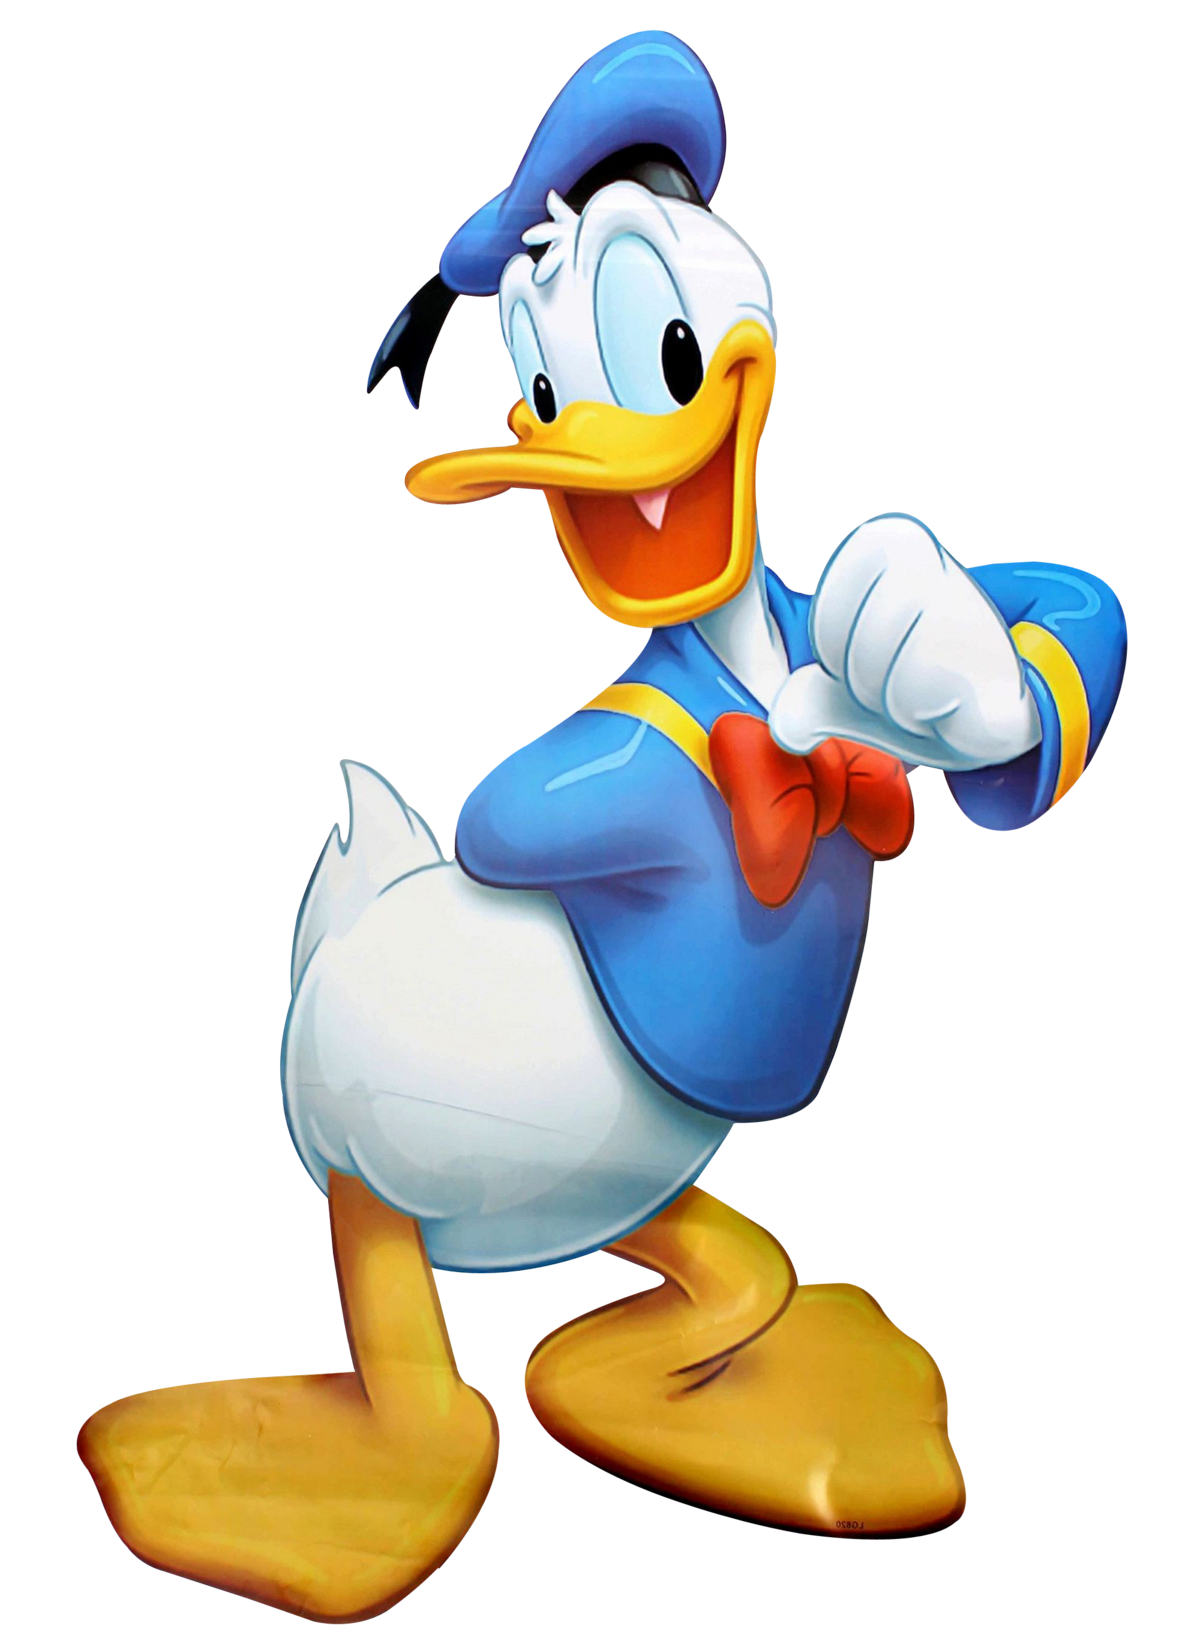 christian valera recommends Pics Of Donald Duck